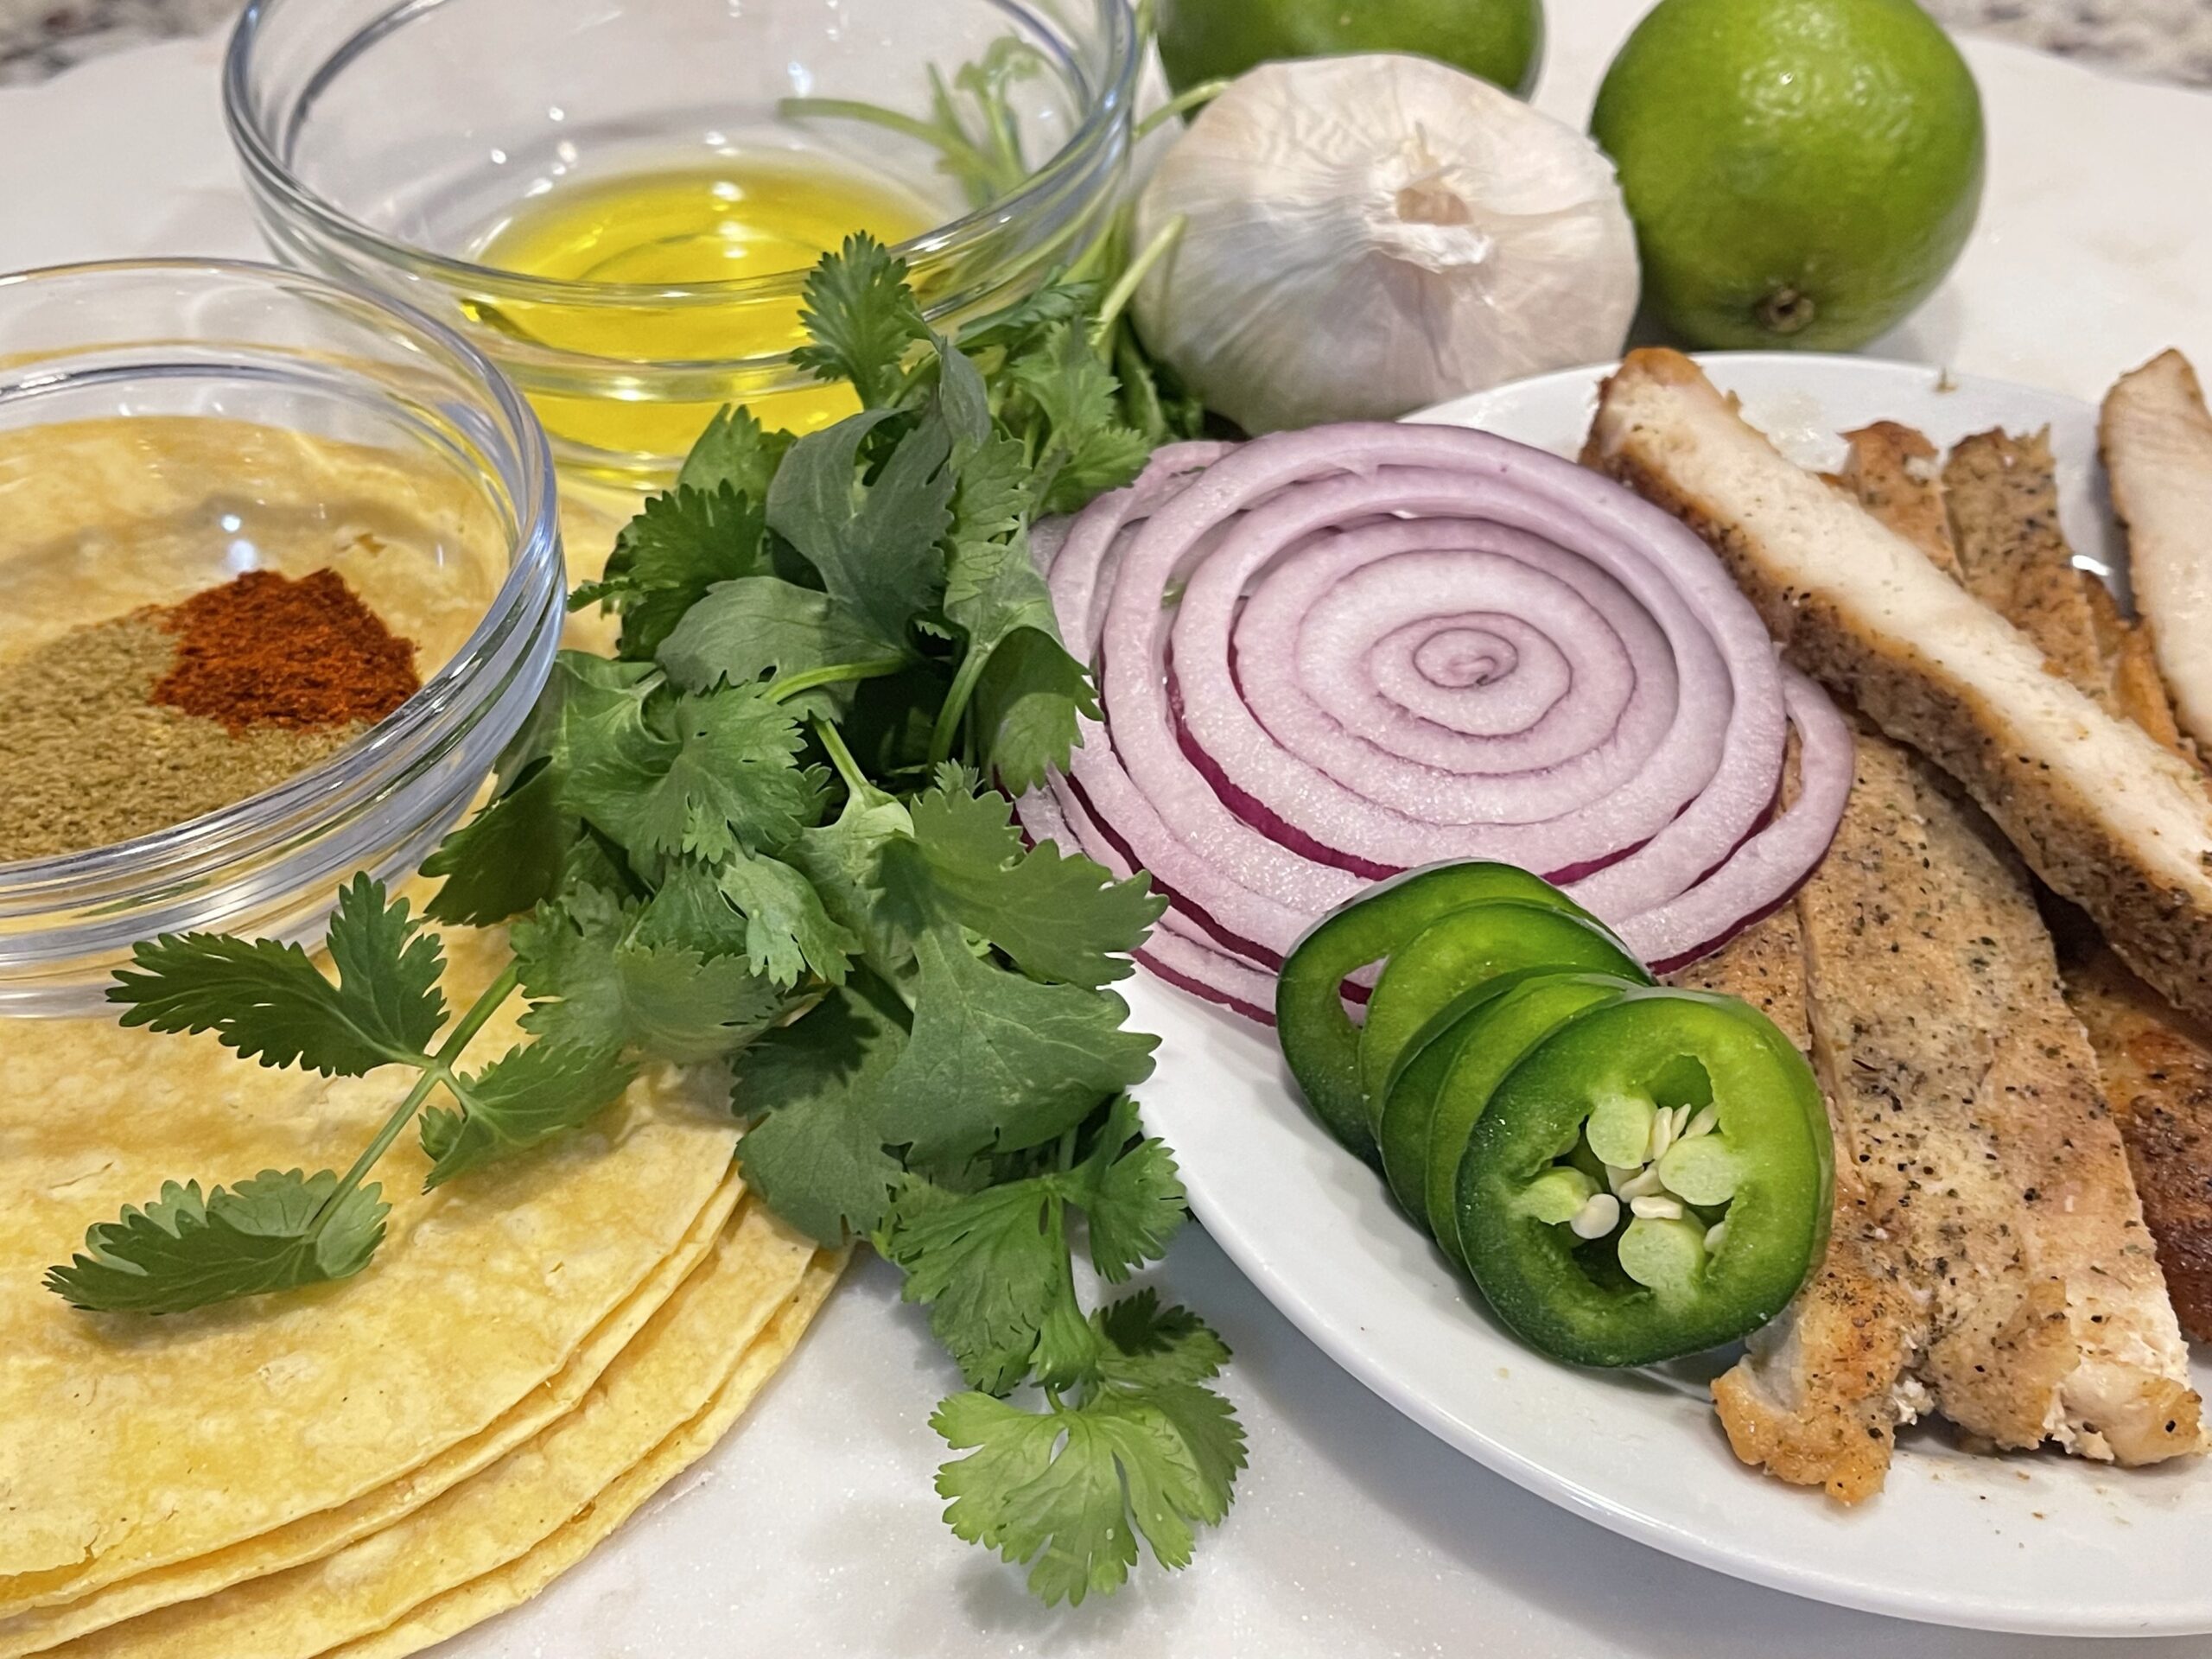 Image of ingredients for 15 Minute Street Tacos including chicken, onions, cilantro, seasonings, and jalapeños.